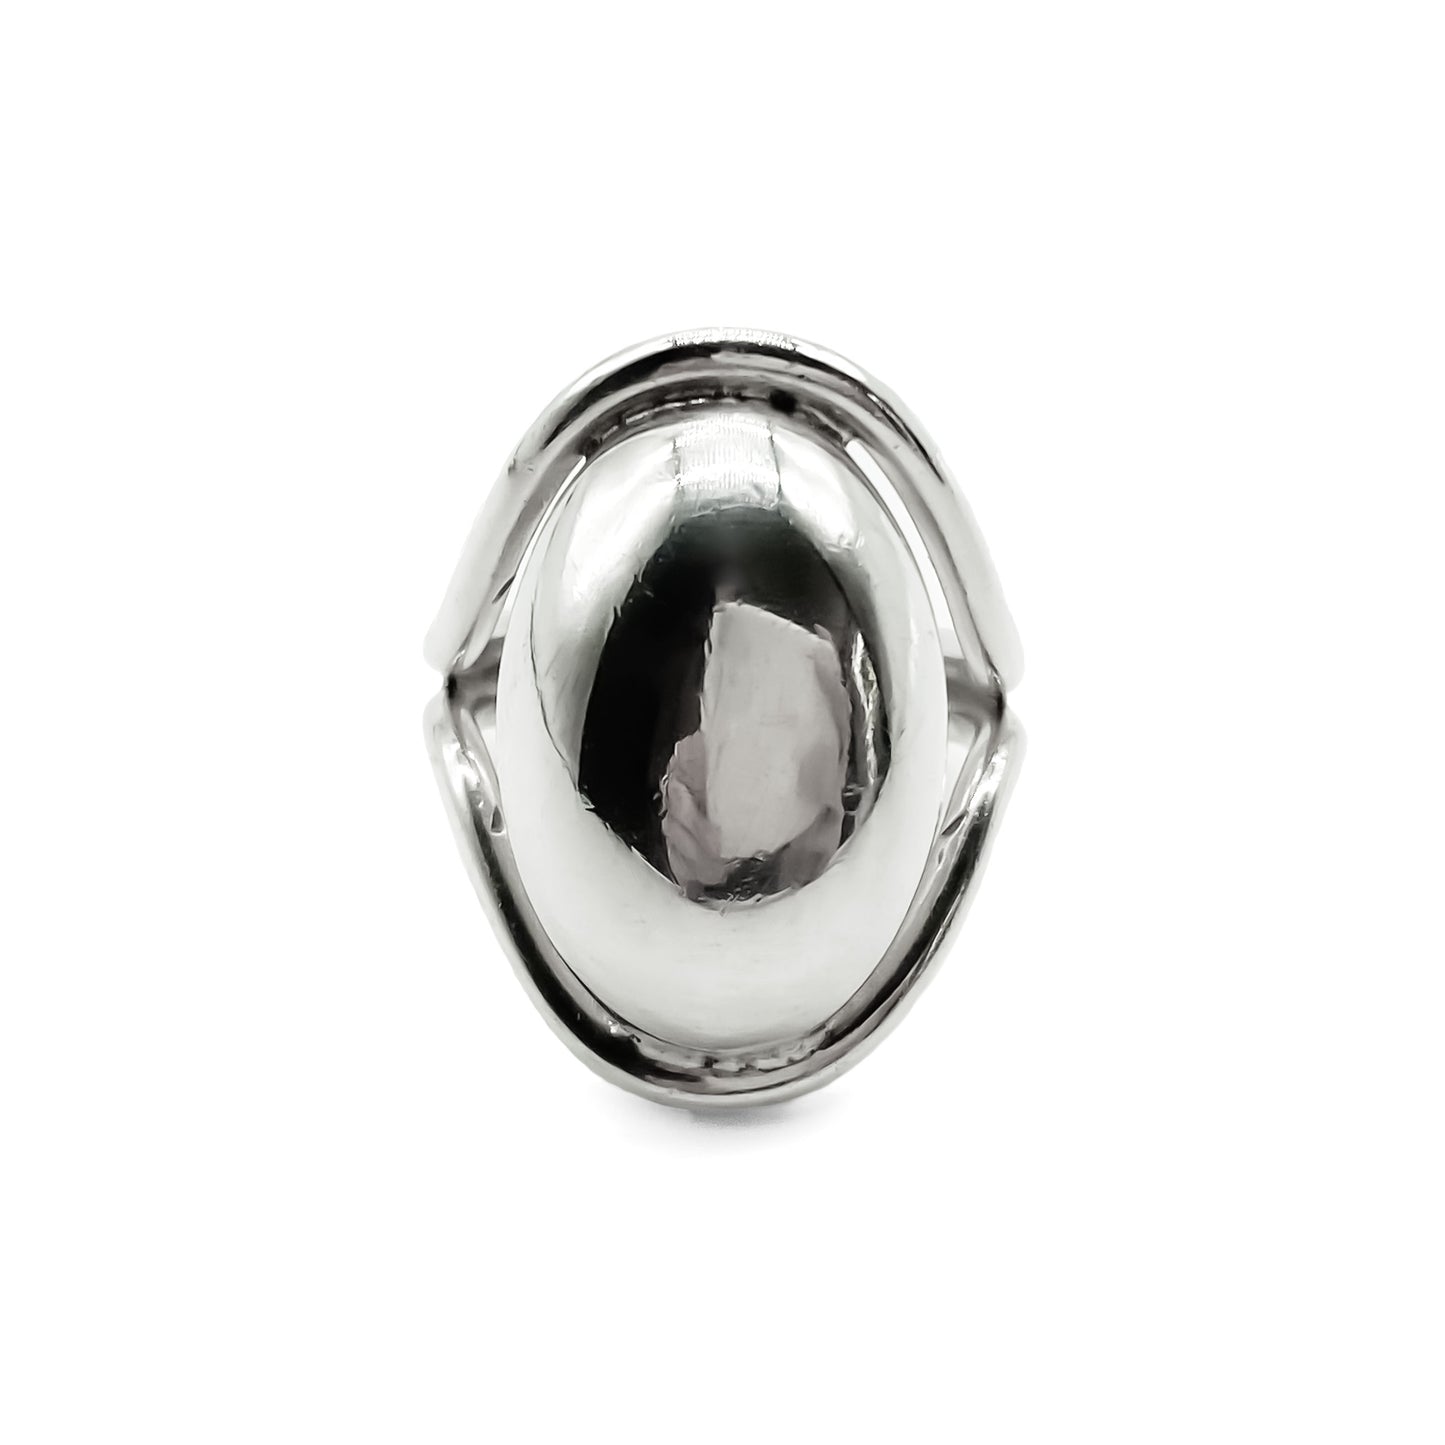 Stylish dome-shaped Modernist sterling silver ring.